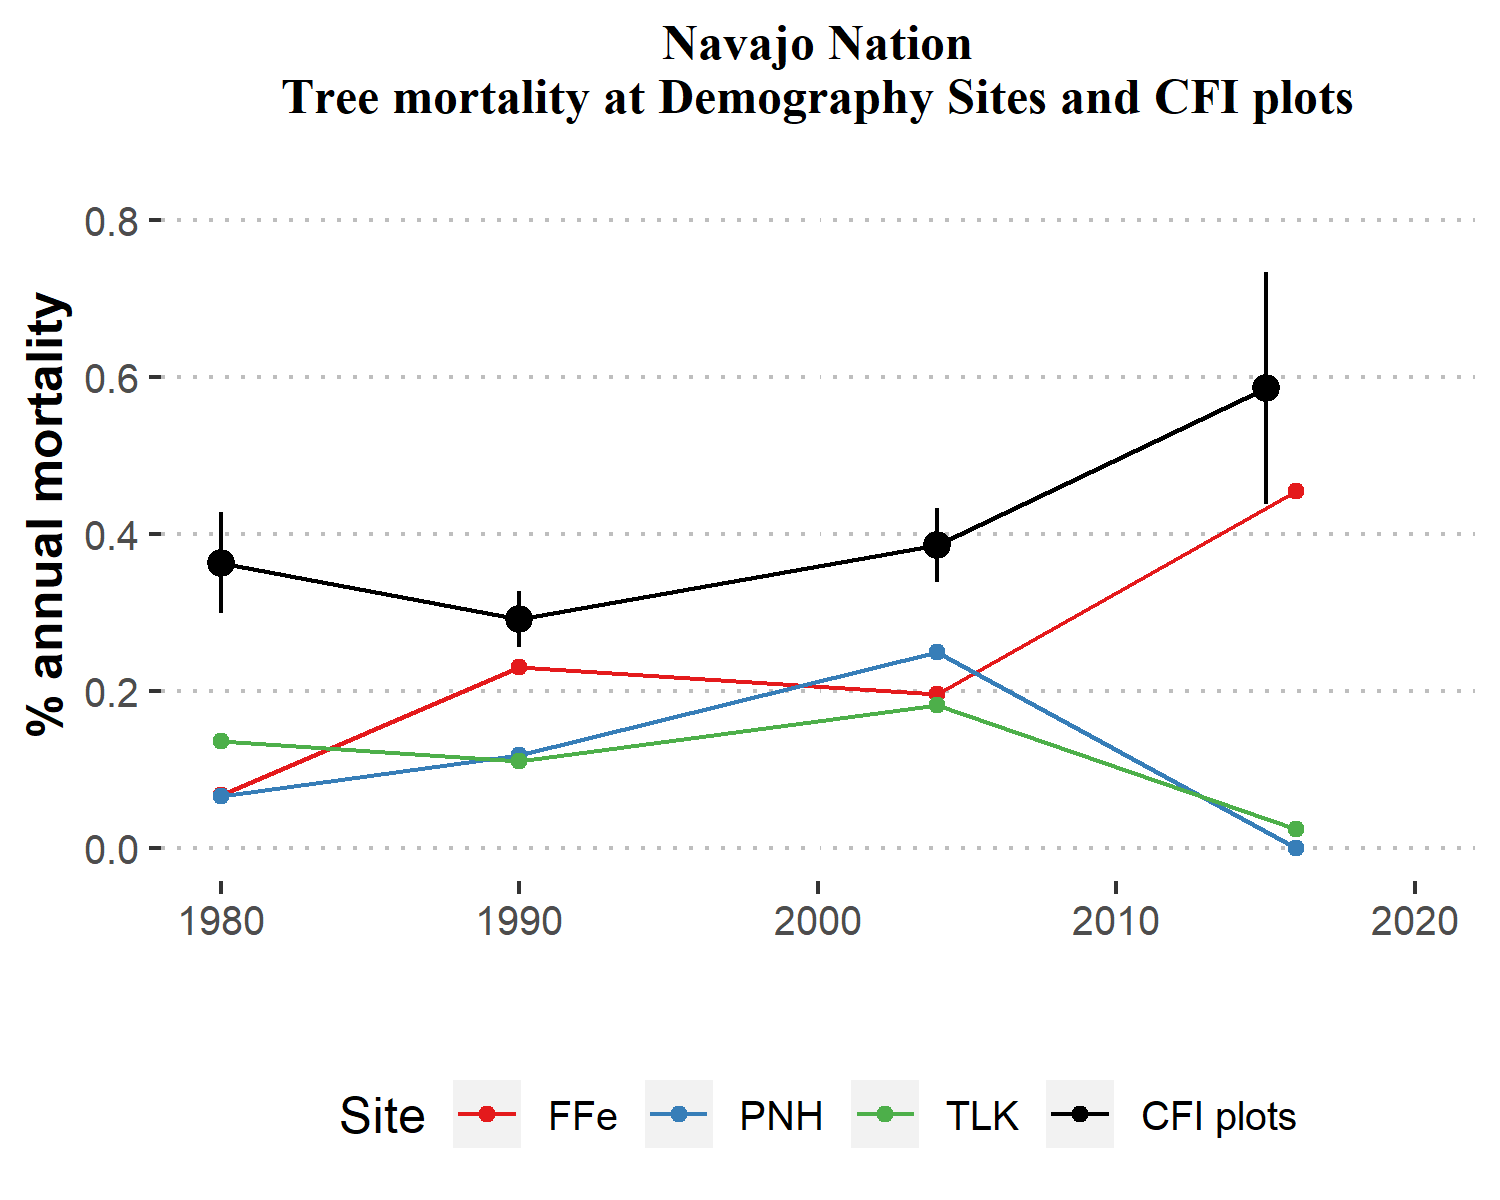 Comparison of conifer mortality rates (1980-2016) between Navajo Nation CFI plots and Navajo demography sites. Sites include Falling Irons (FFe), Piney Hill (PNH) and Tohatchi Lookout (TLK). Vertical bars for CFI plots represent 95% confidence intervals.